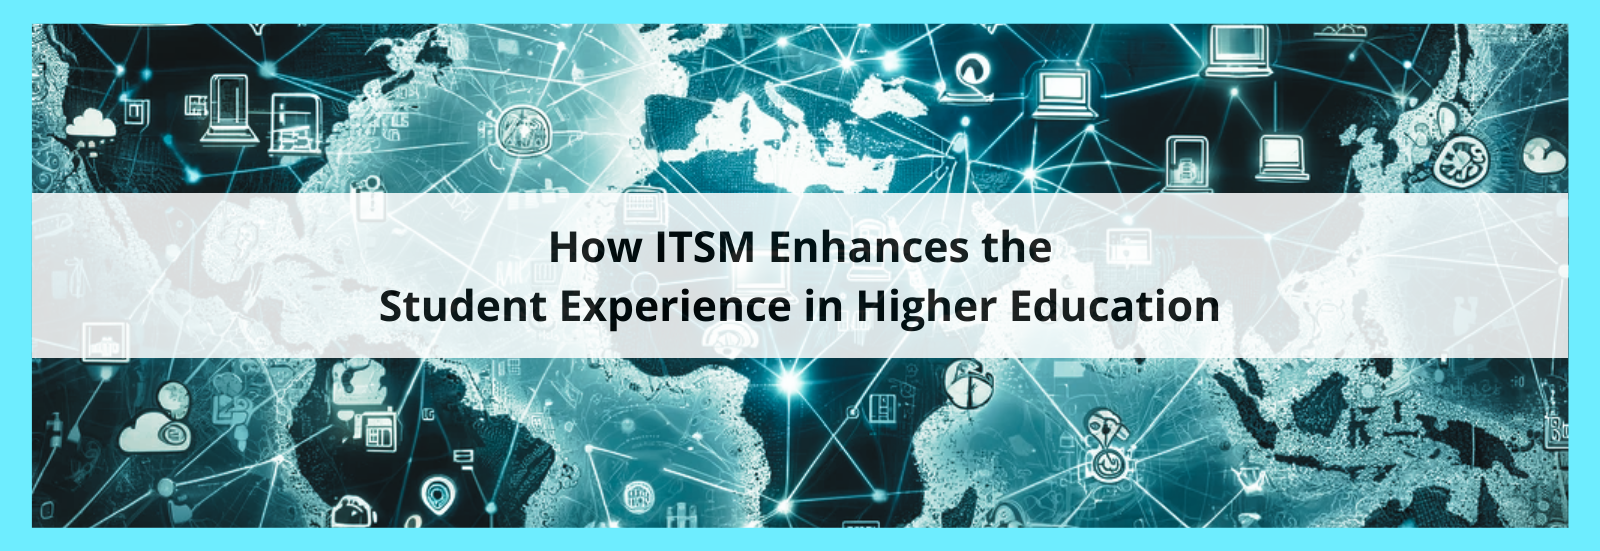 How ITSM Enhances the Student Experience in Higher Education